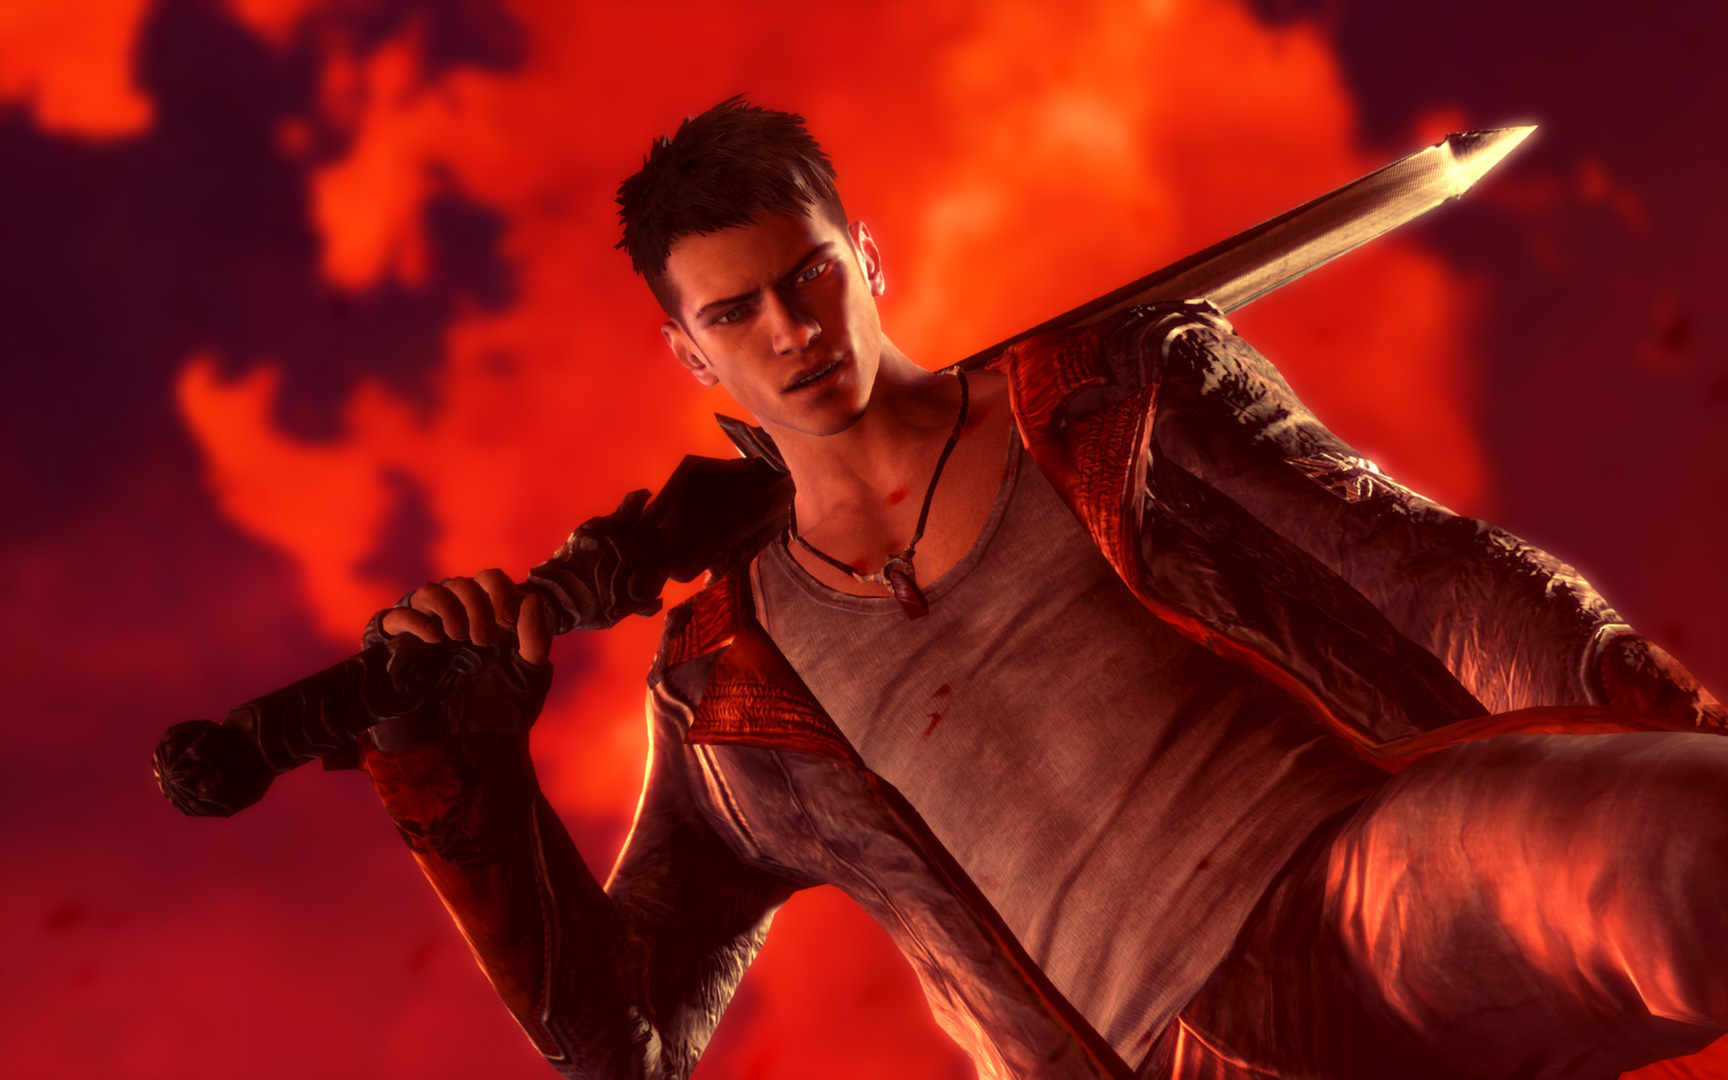 Why Devil May Cry 3 Was Harder in America – PlatinumParagon